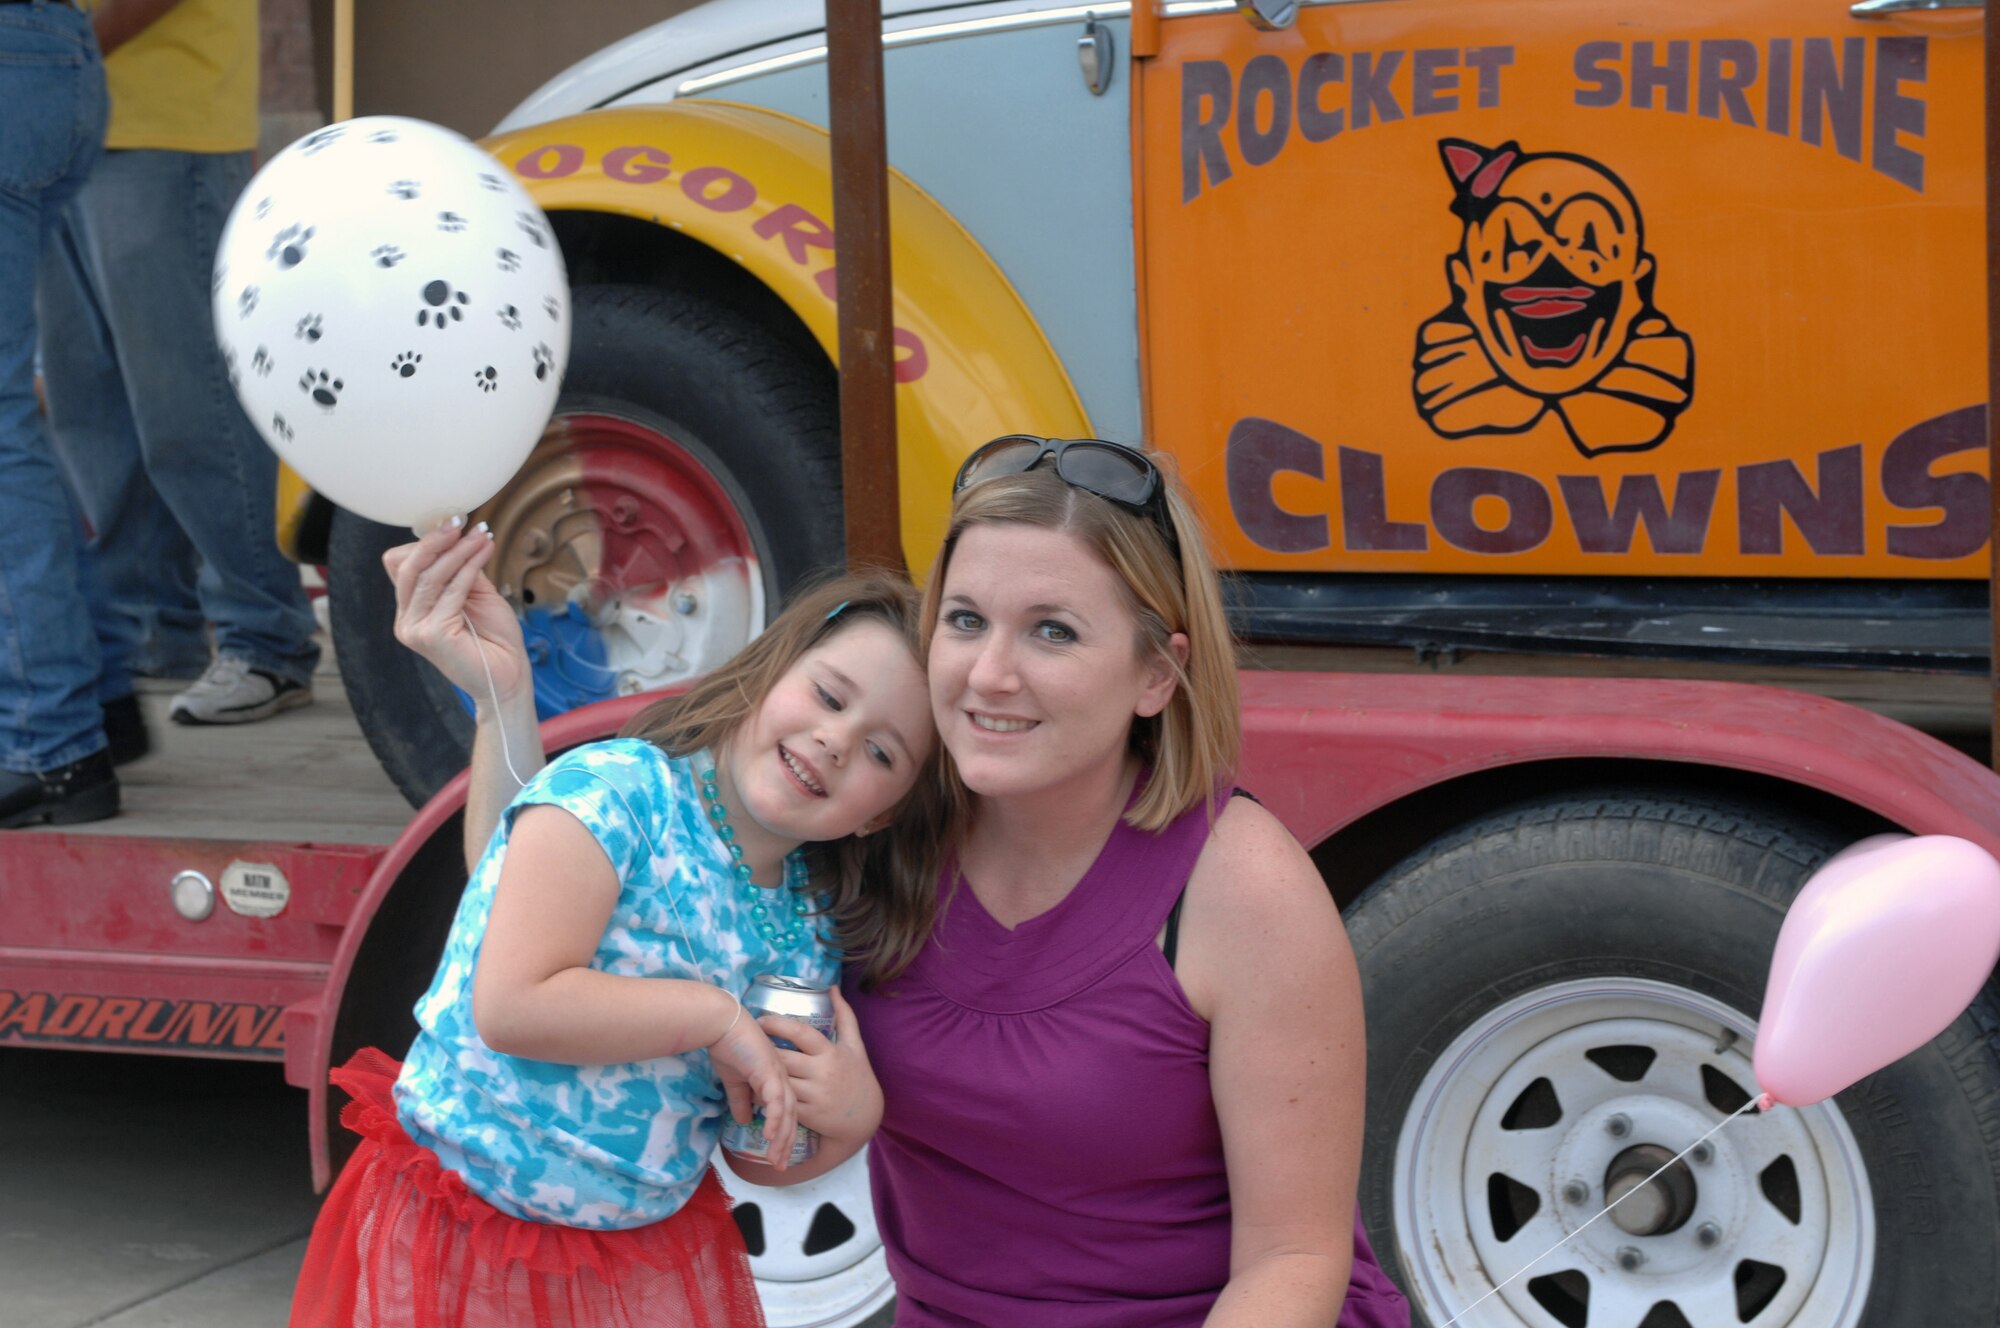 Ms. Amy Ochs, with daughter Makeigha Ochs, enjoy their evening at Thanks Team Holloman with balloons from The Rocket Shrine Club, at Holloman Air Force Base, N.M., September 19. Balloons for all ages were given out in different shapes, sizes and colors for all members of Holloman. (U.S. Air Force photo/Airman 1st Class Veronica Salgado)